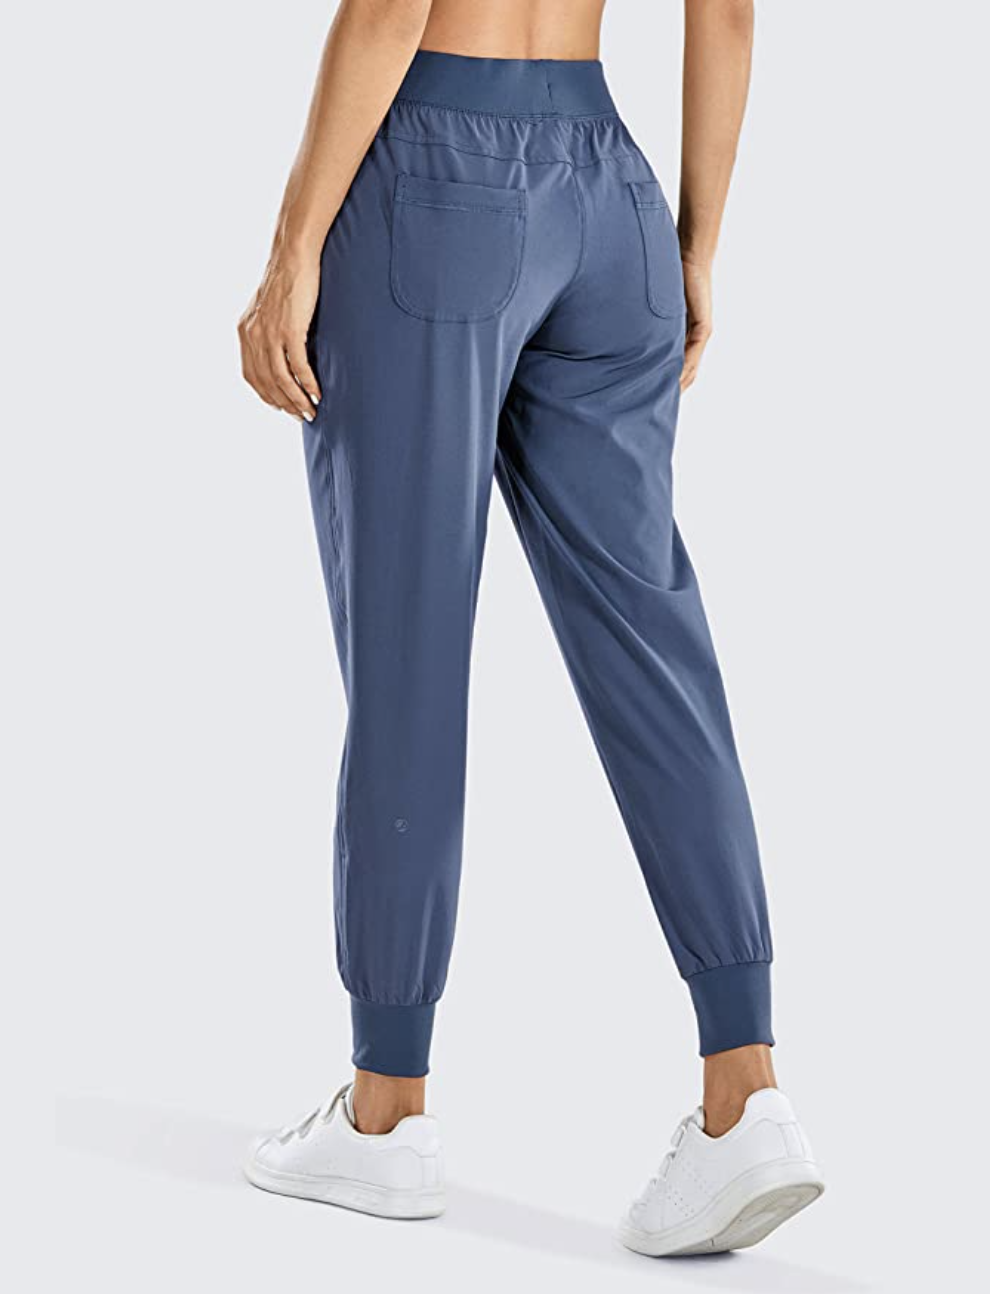 Crz Yoga Lightweight Joggers Are Much So Cheaper Than Lululemon